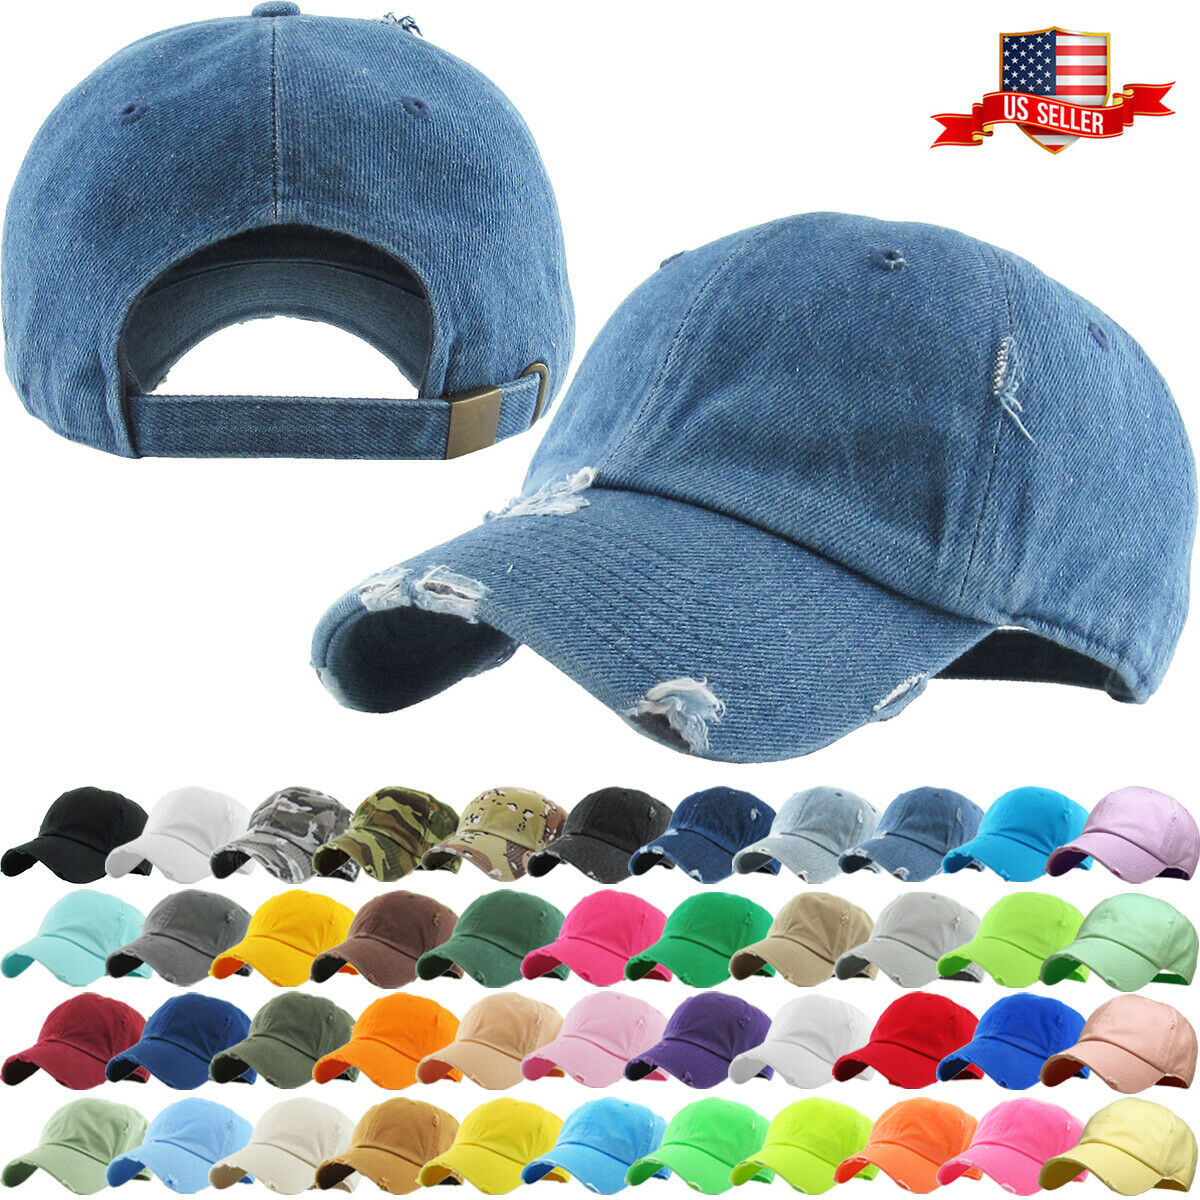 Solid Distressed Vintage Cotton Polo Style Baseball Ball Cap Hat 100% Cotton New